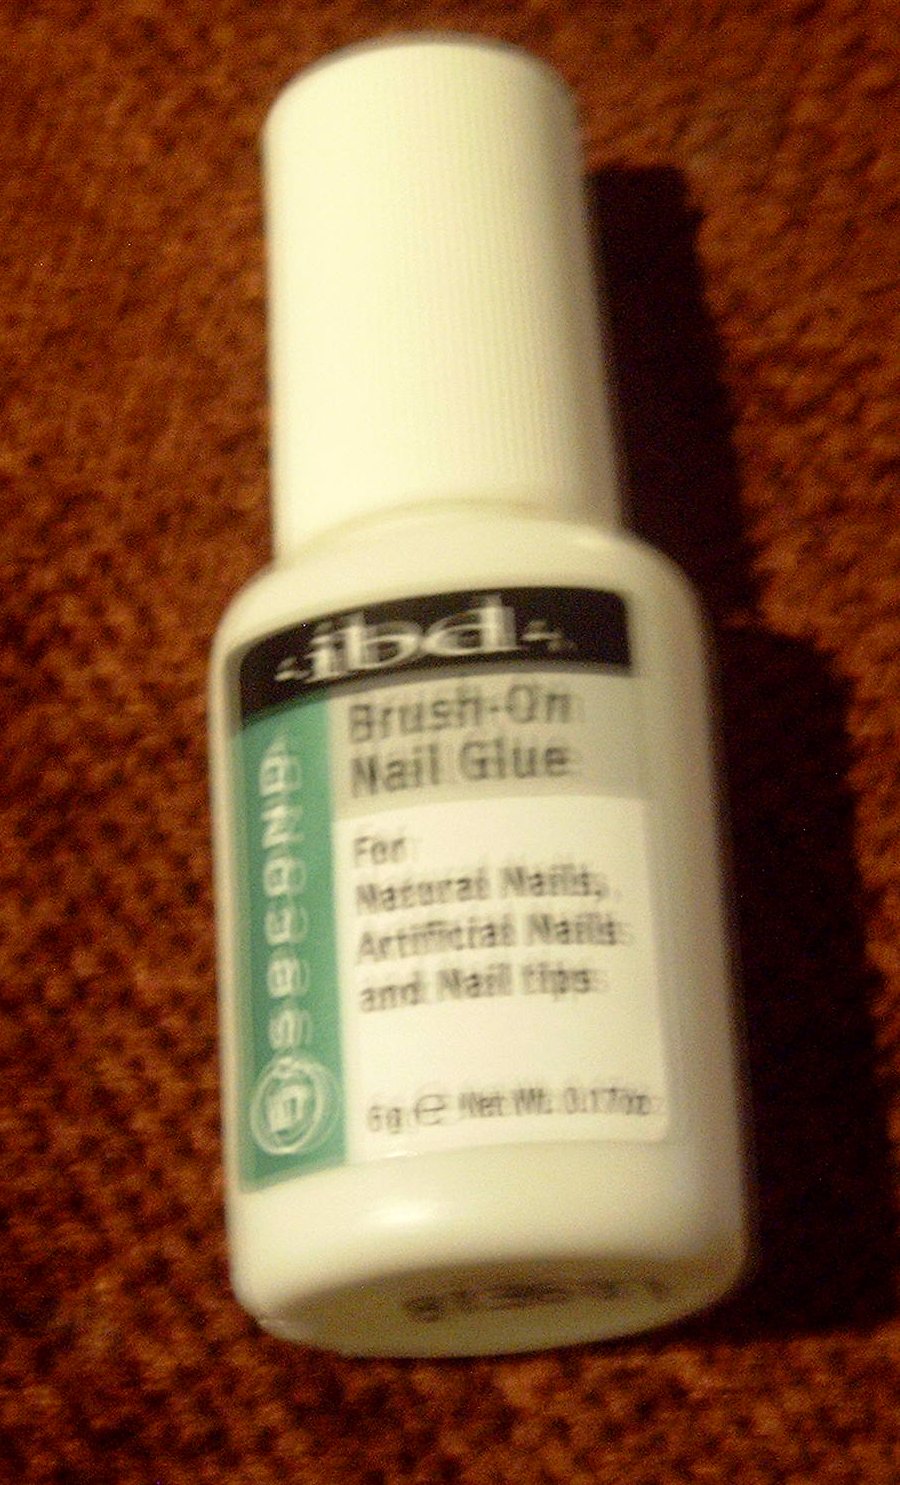 Nail glue, any 90 second brand works great. I like the IBD brush-on style